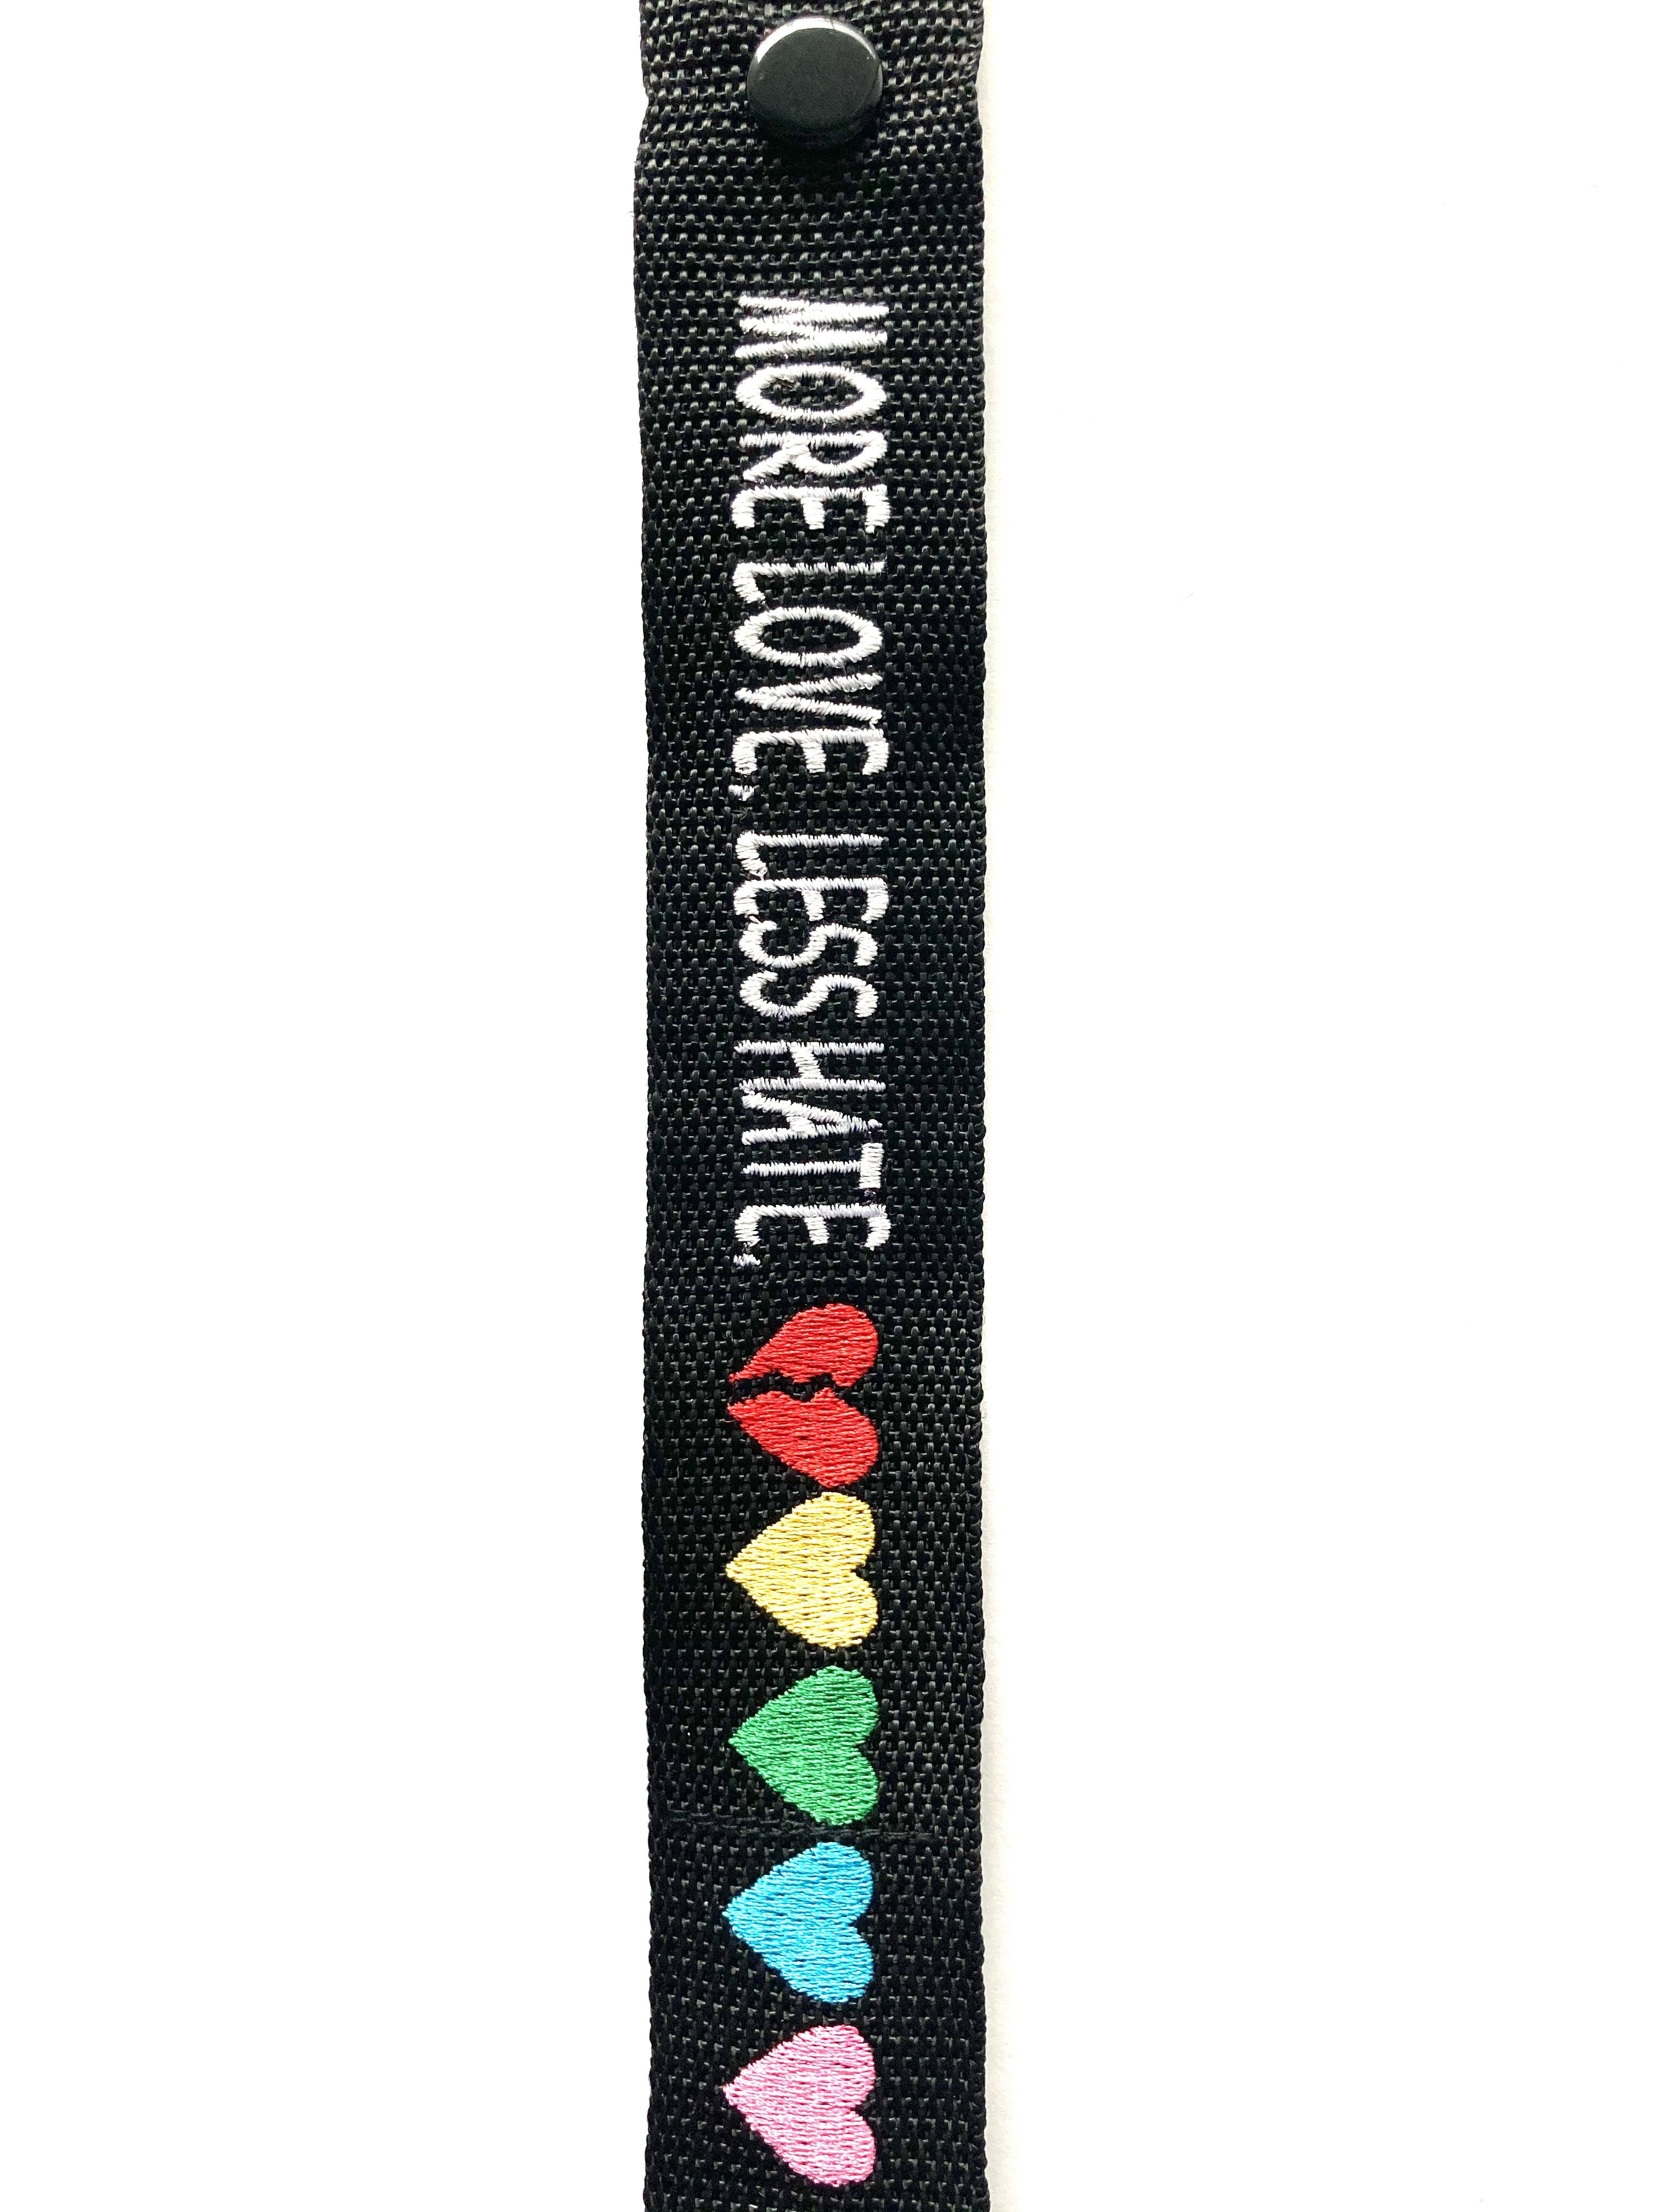 Pride, Love, Commemoration Luggage Tags - More love less hate